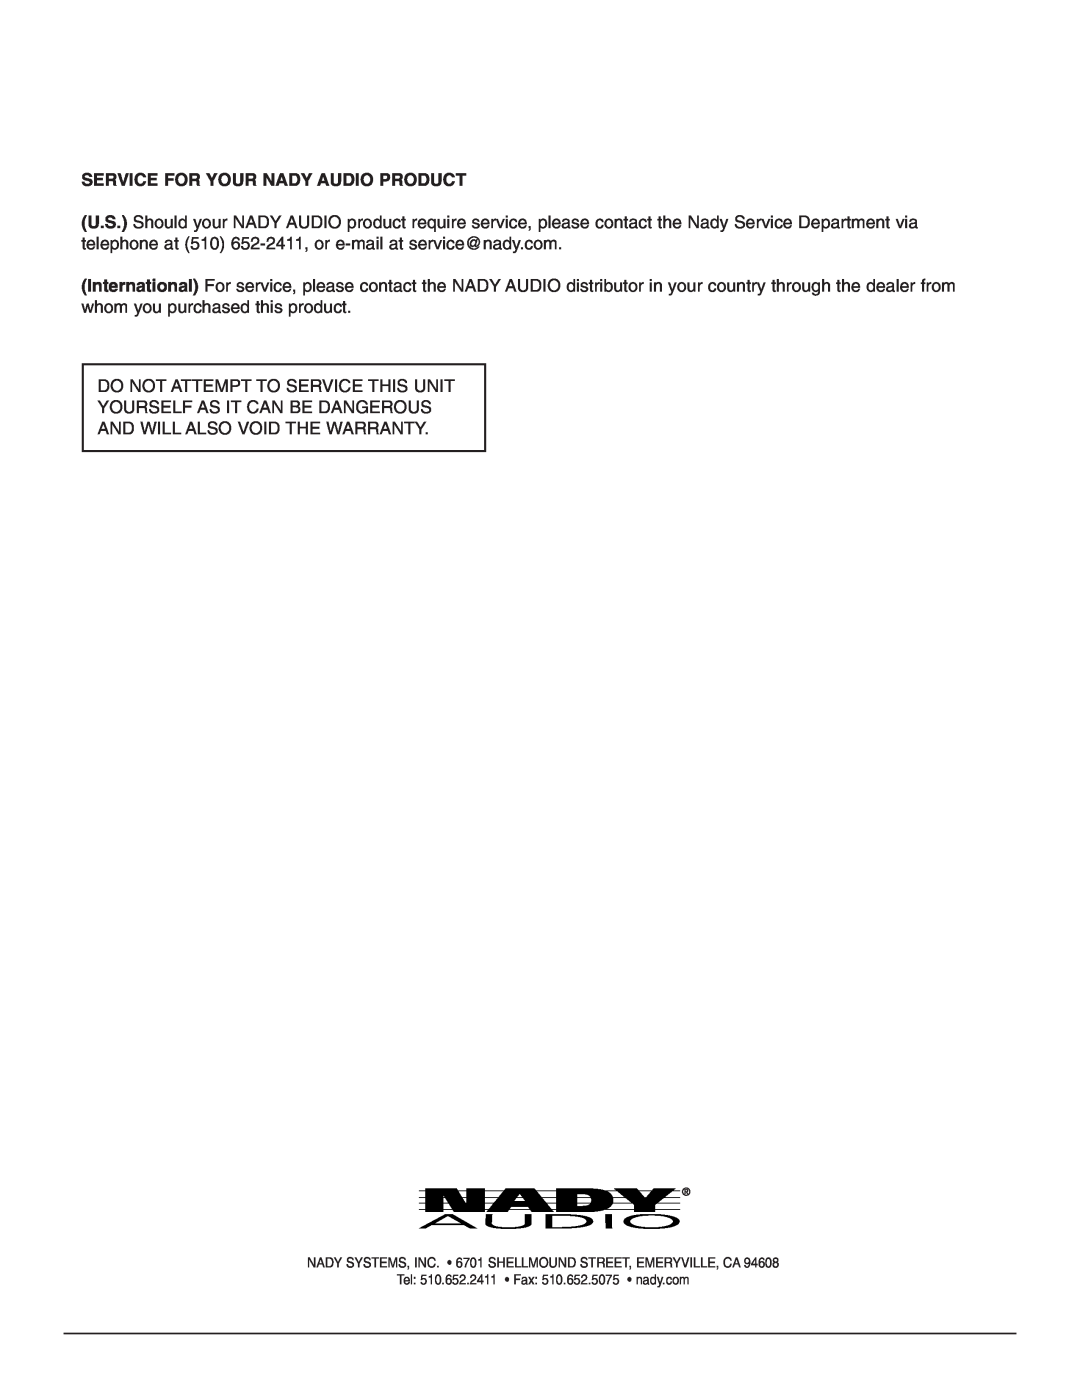 Nady Systems GTH-100 owner manual Service For Your Nady Audio Product 